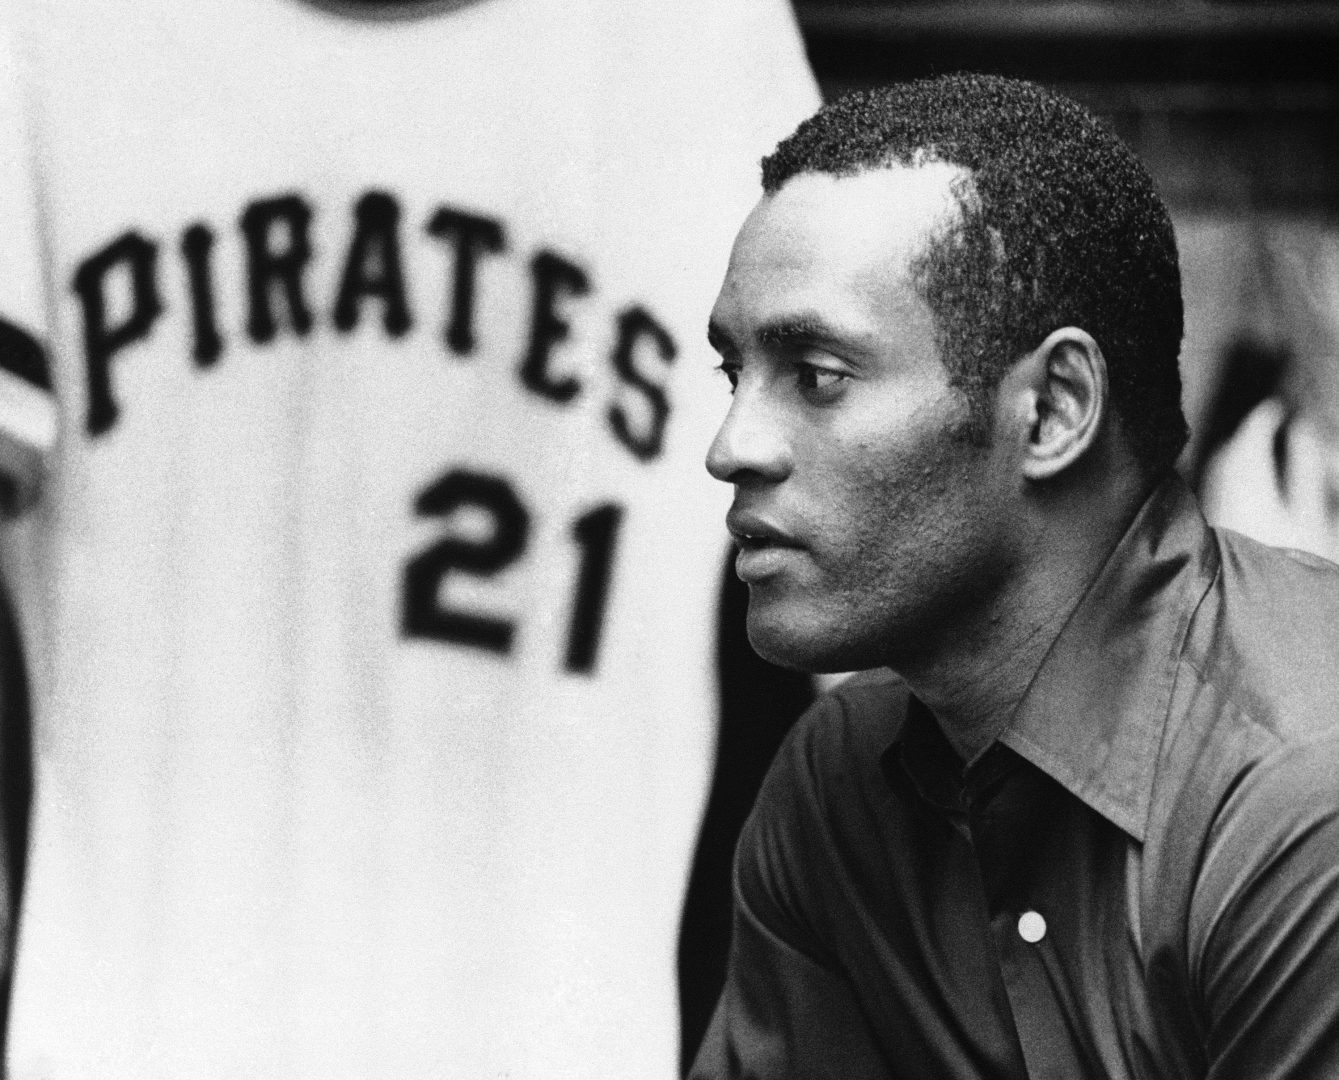 Pittsburgh Pirates to wear No. 21 on Sept. 9 to honor Roberto